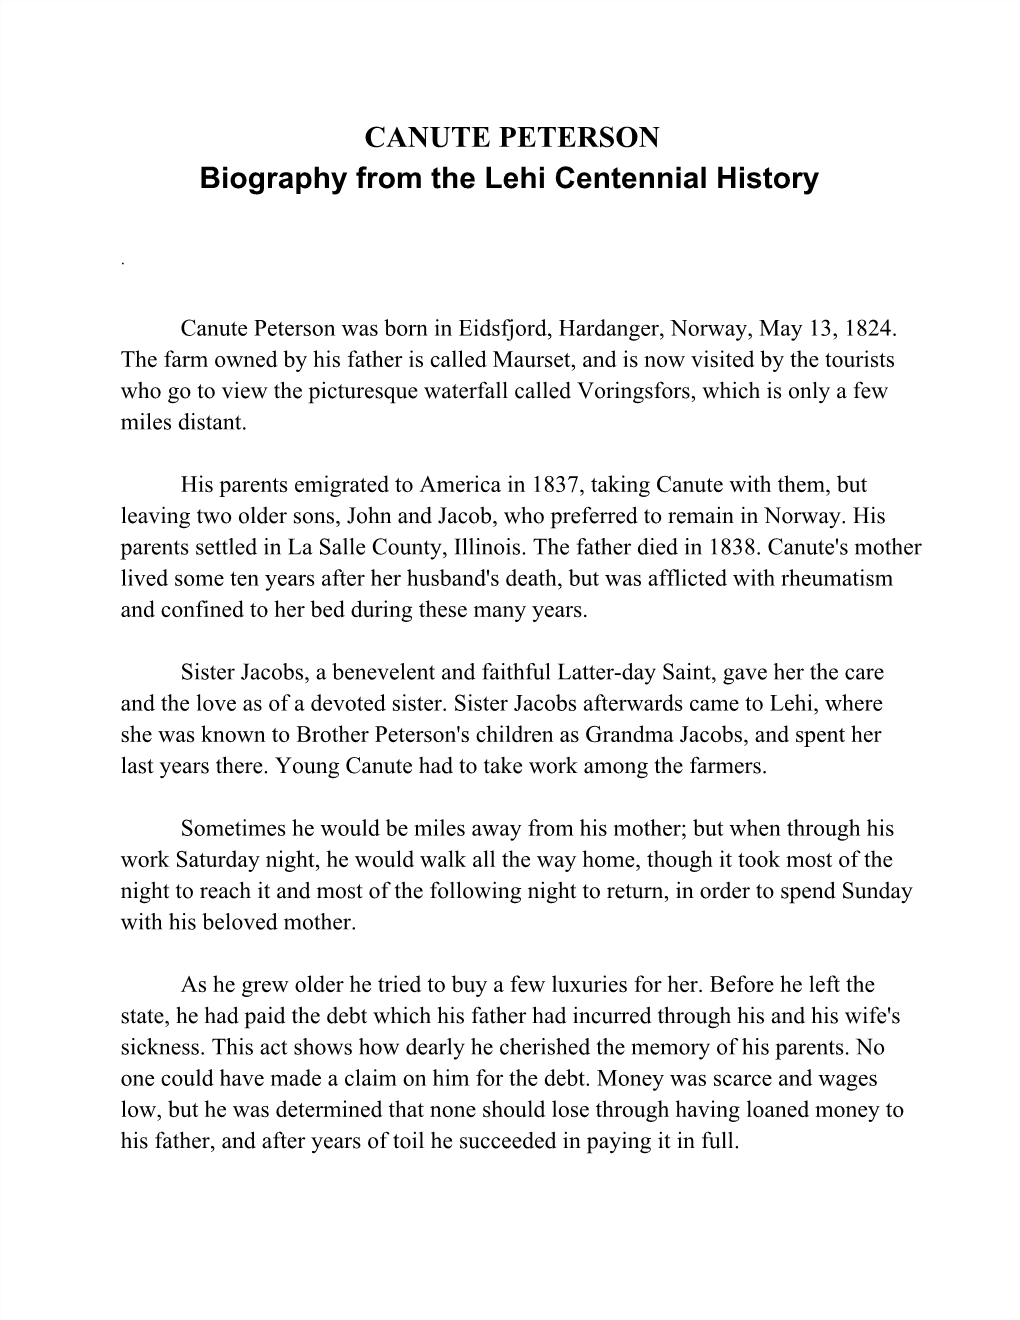 CANUTE PETERSON Biography from the Lehi Centennial History